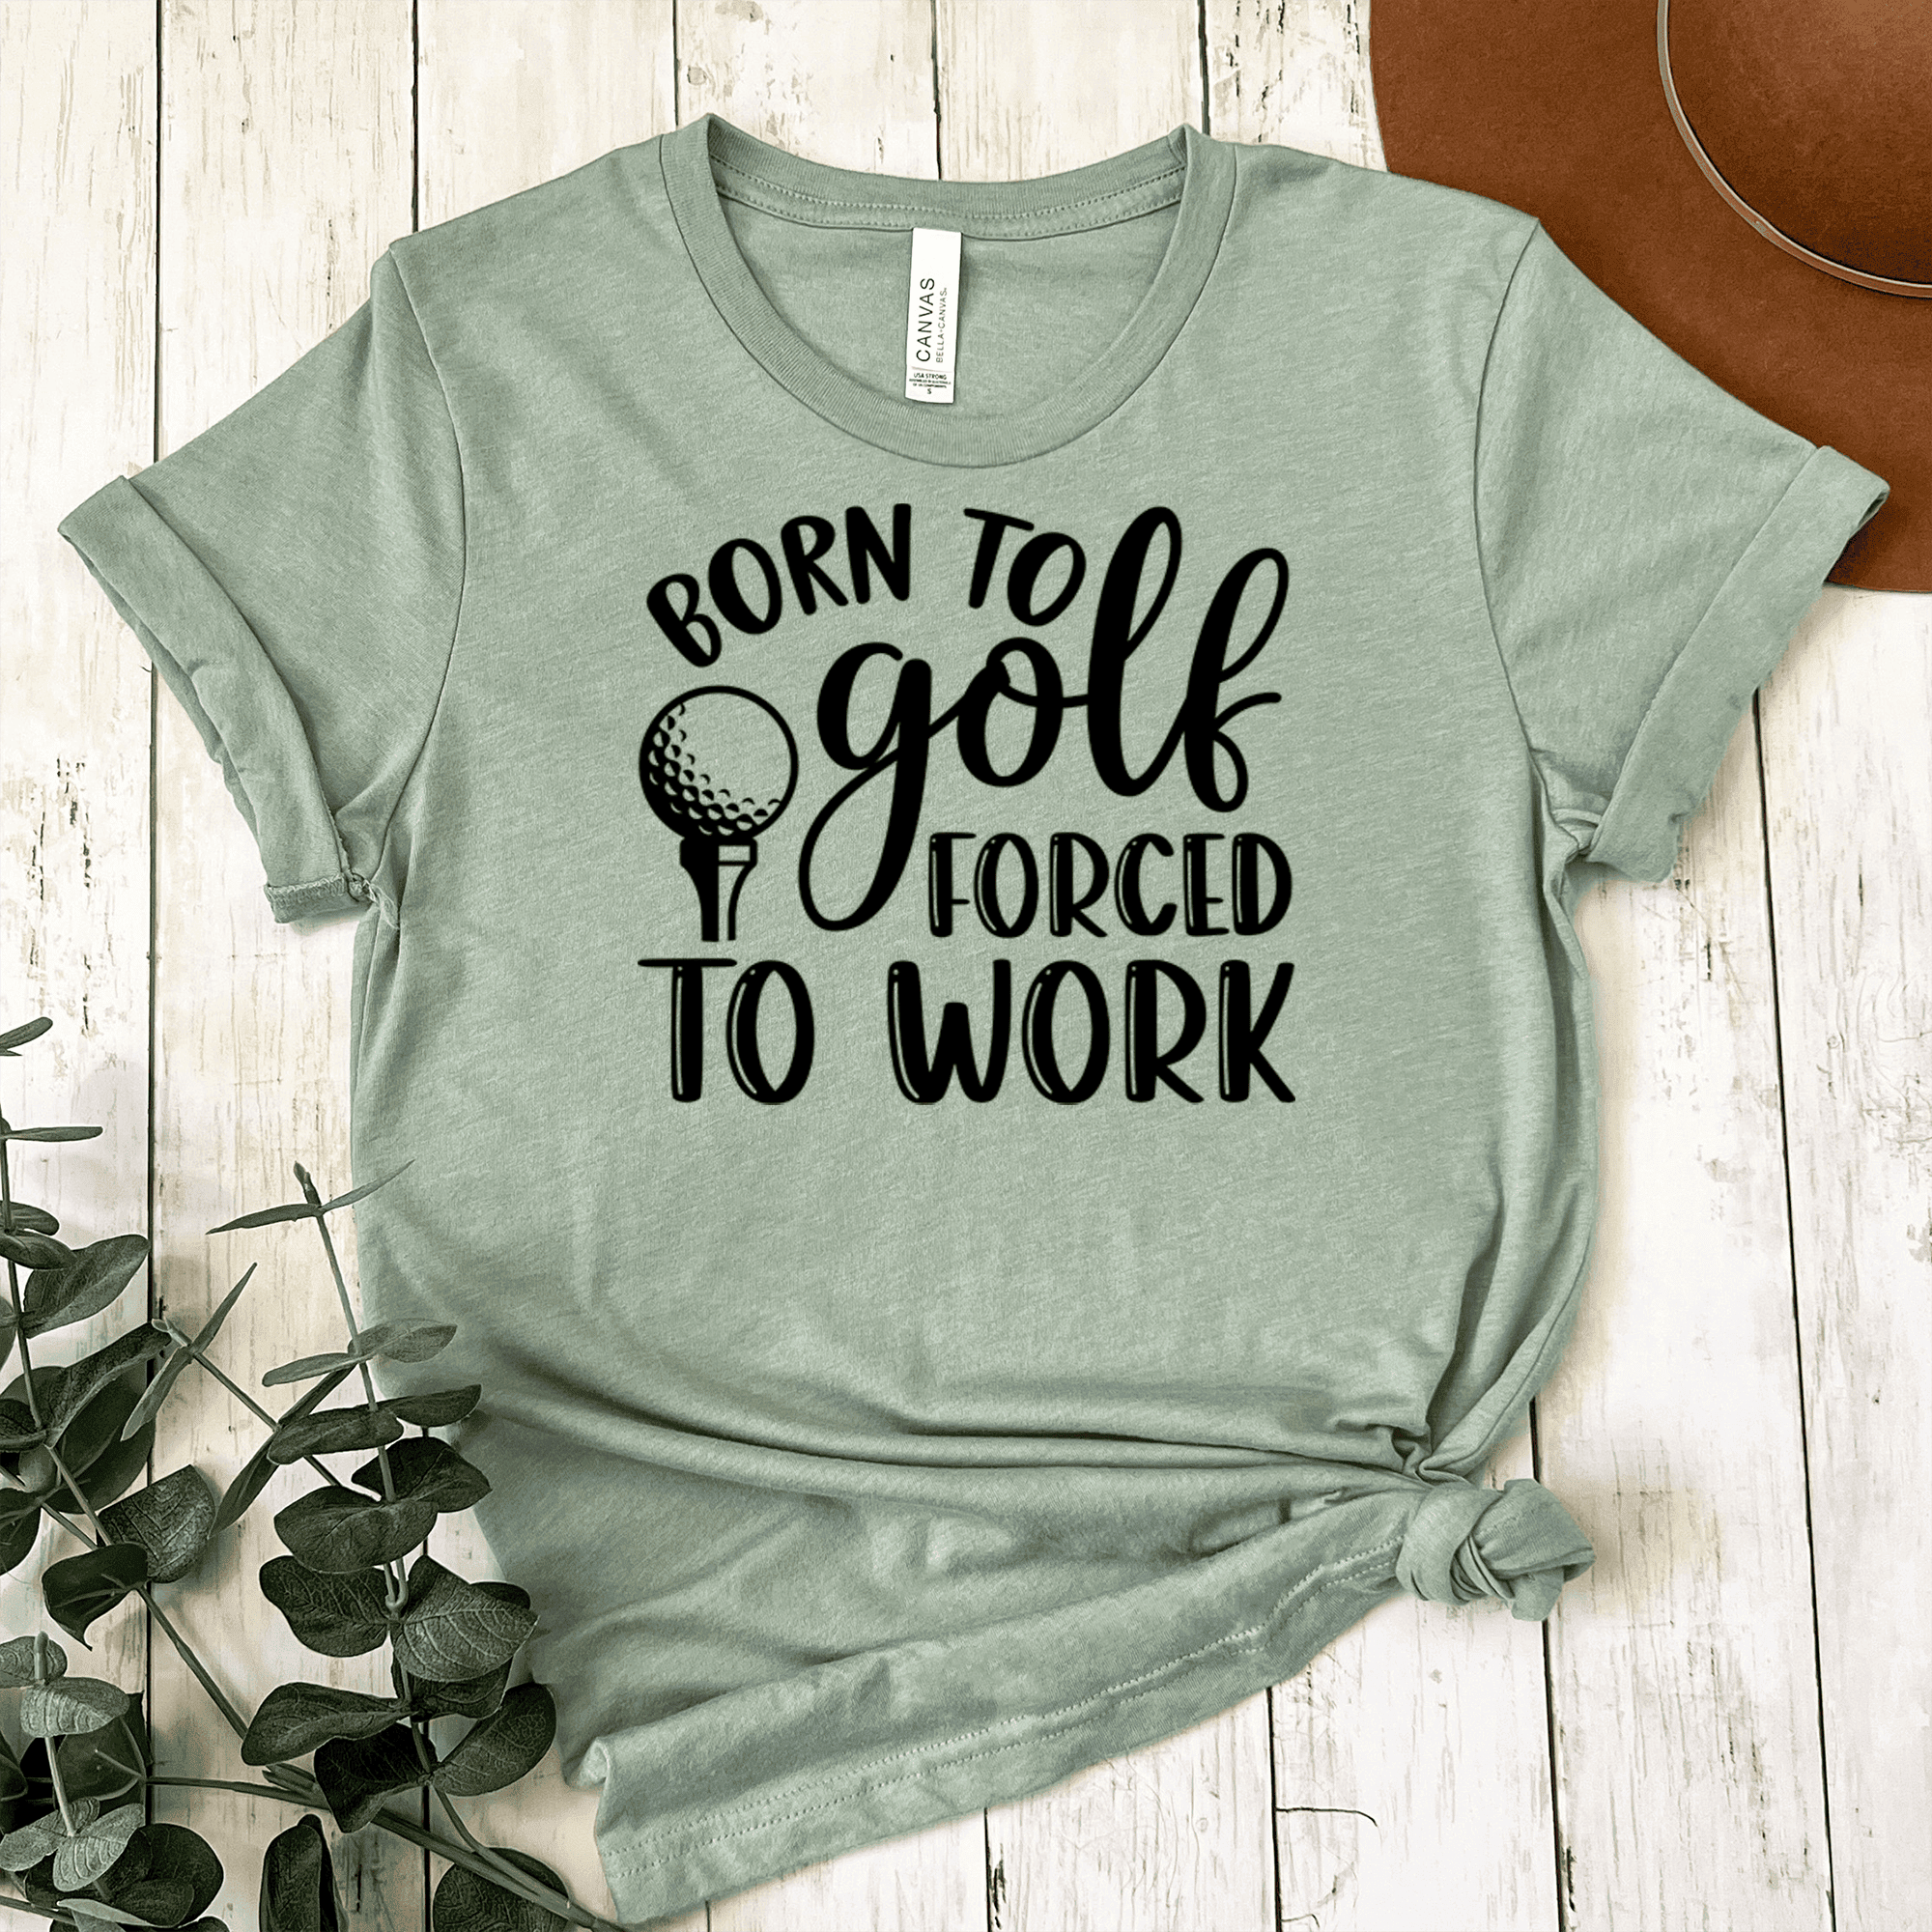 Womens Light Green T Shirt with This-Girls-Born-To-Golf design